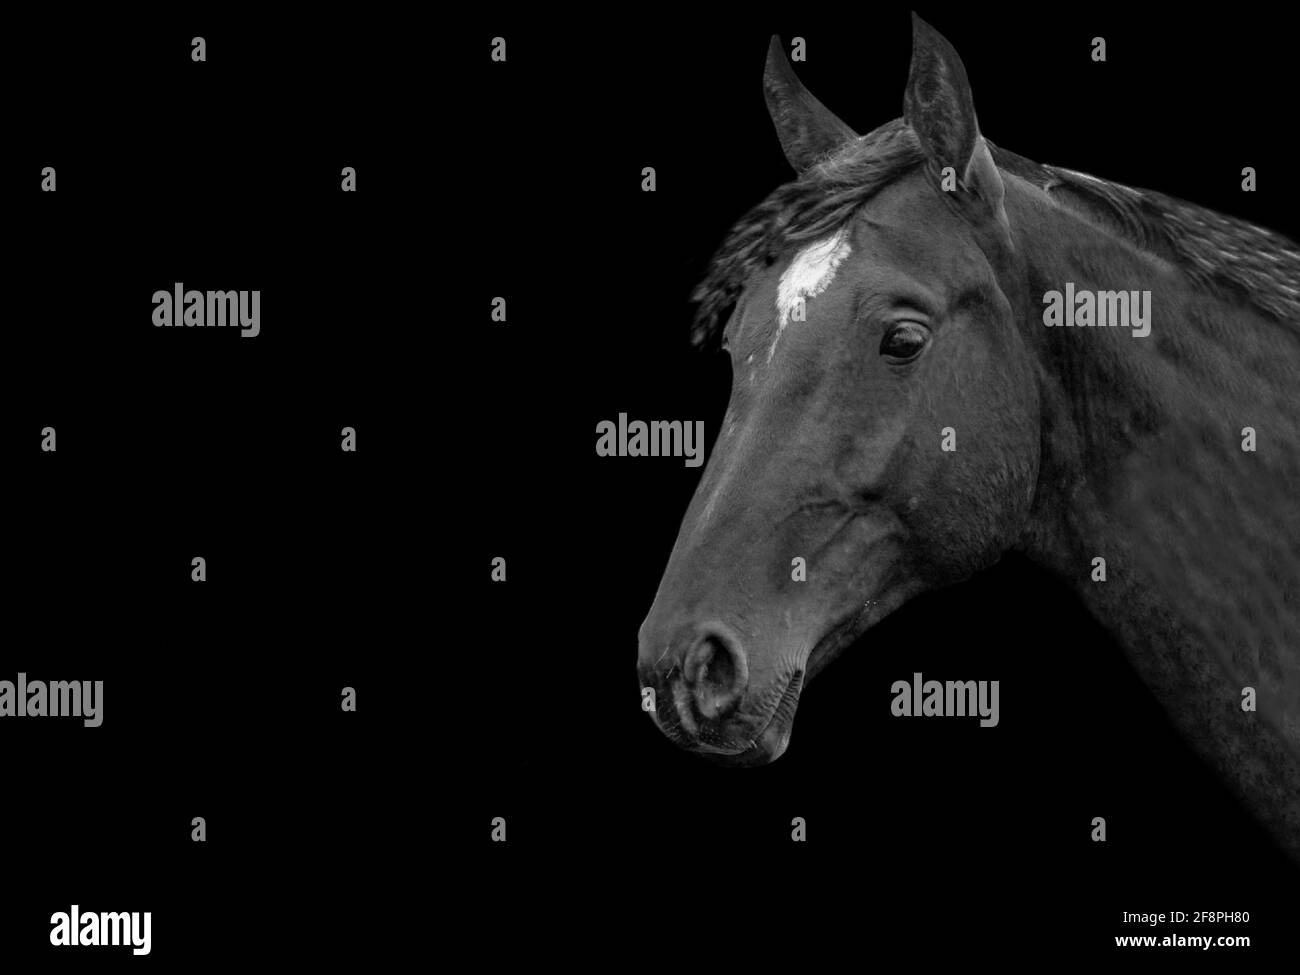 Long horse face Black and White Stock Photos & Images - Alamy